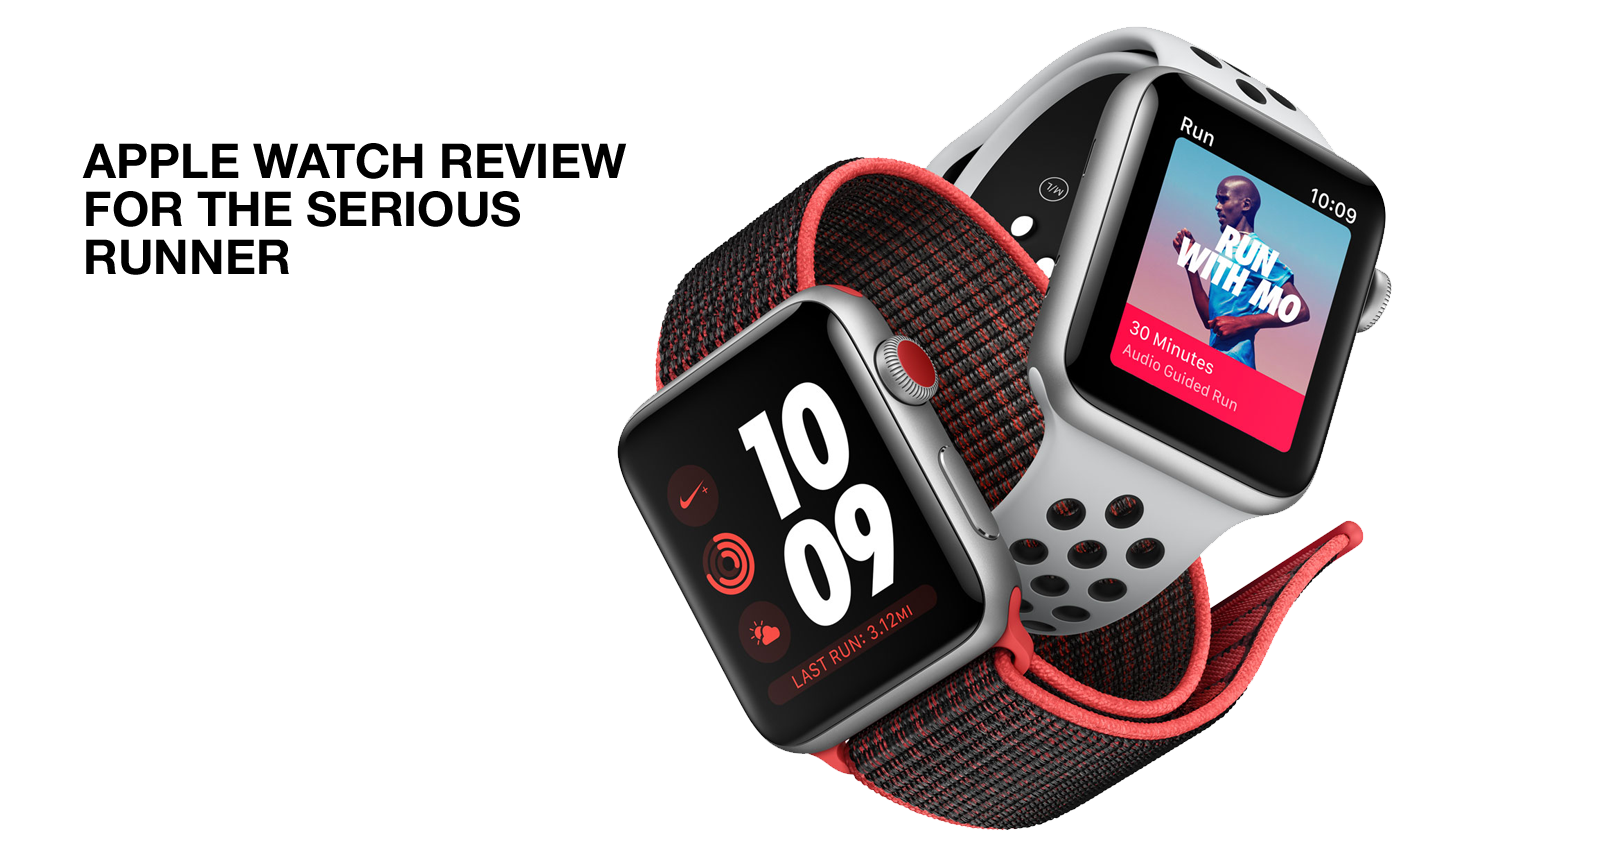 Apple Watch 3 Review For Running: The Mainstay Go-To Runner's SmartWatch